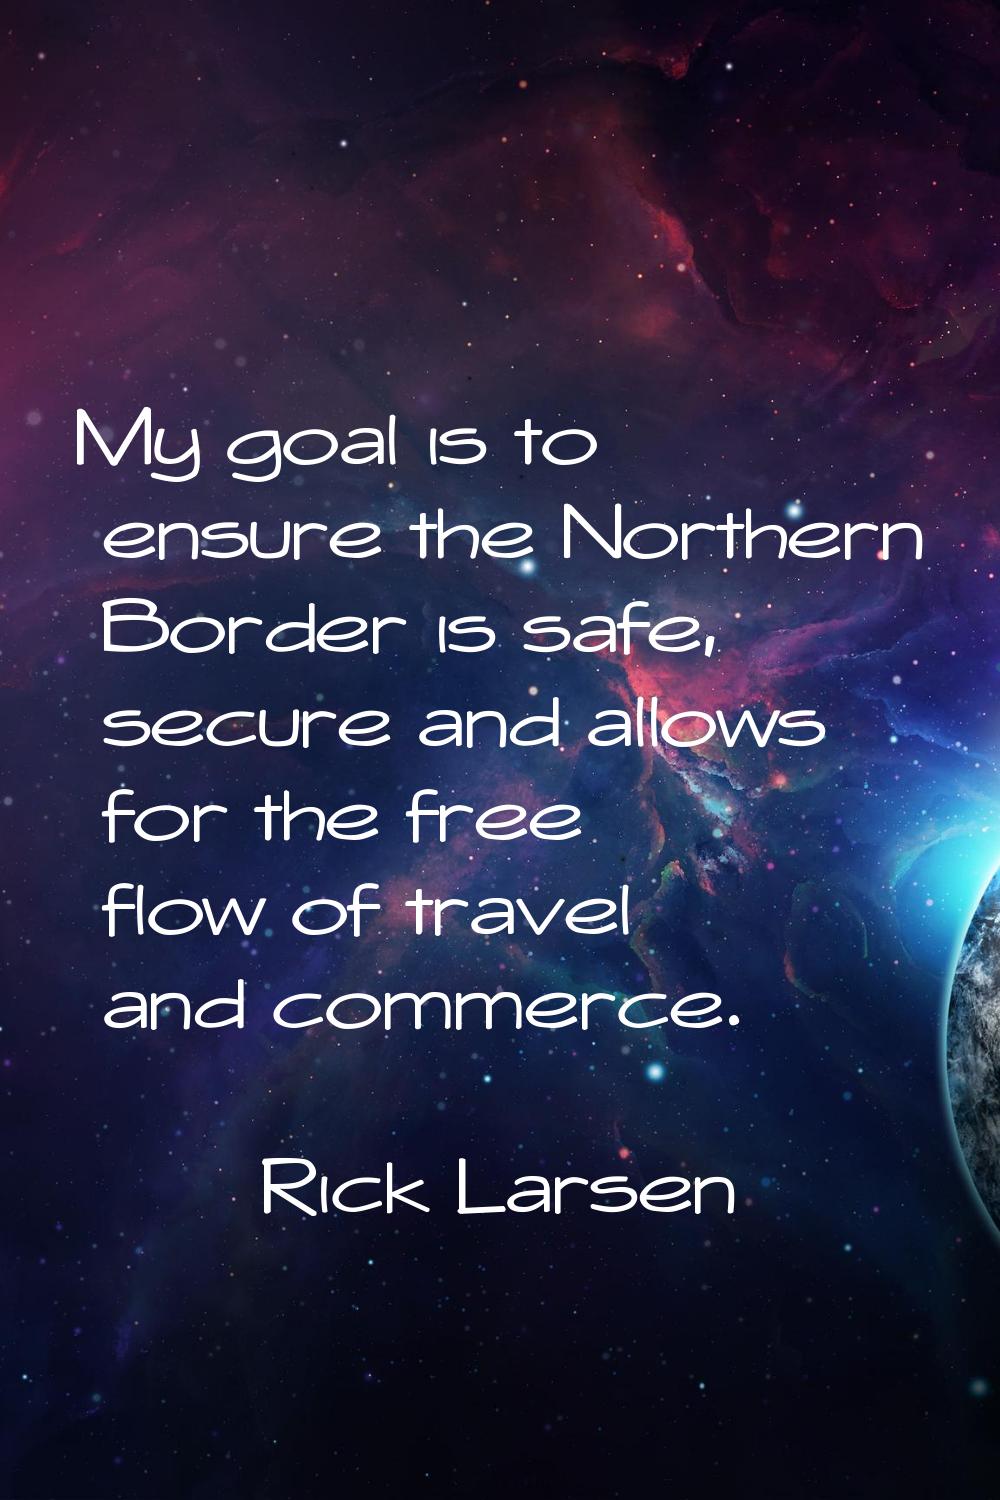 My goal is to ensure the Northern Border is safe, secure and allows for the free flow of travel and